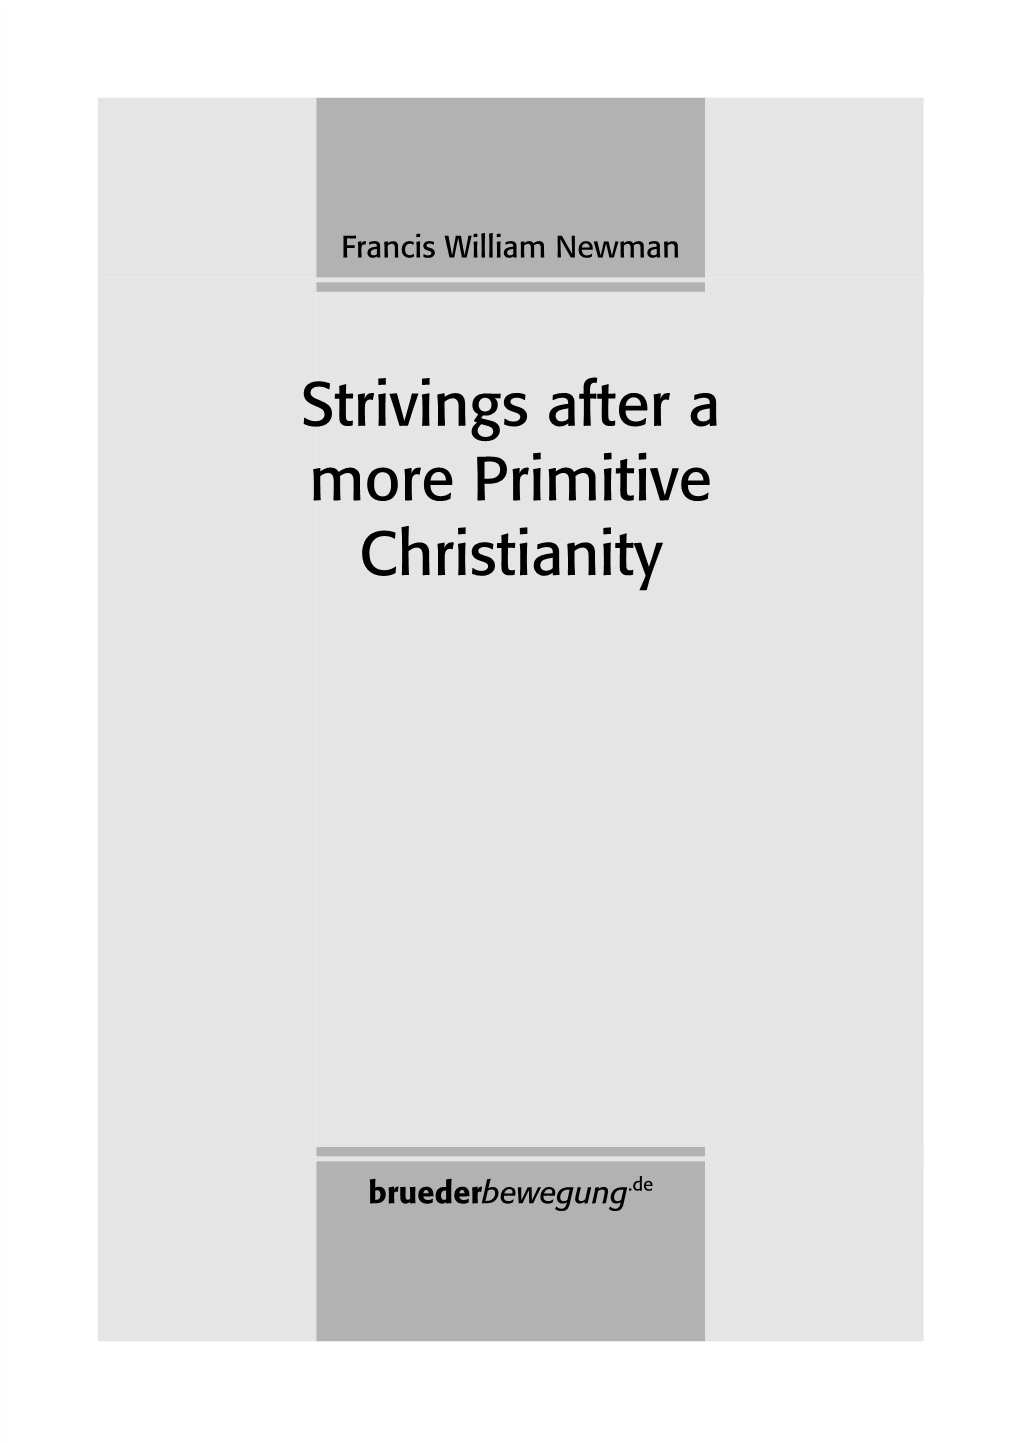 FRANCIS WILLIAM NEWMAN: STRIVINGS AFTER a MORE PRIMITIVE CHRISTIANITY 4 Tion; Though I Was at First Offended by His Apparent Affectation of a Careless Exterior